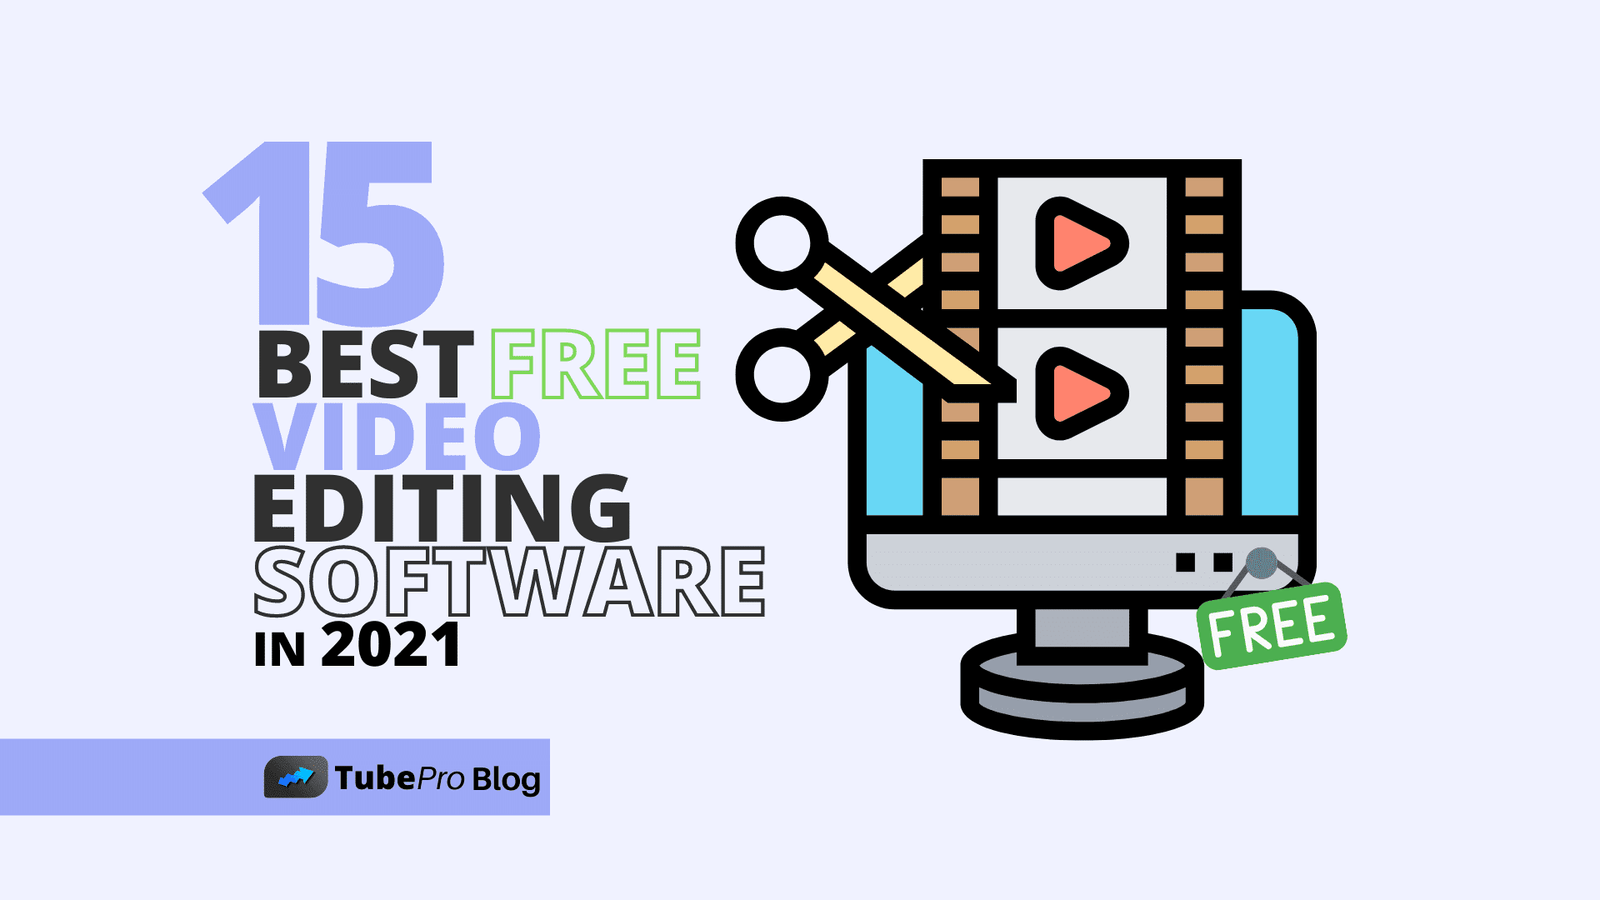 15 Best Free Video Editing Software in 2021